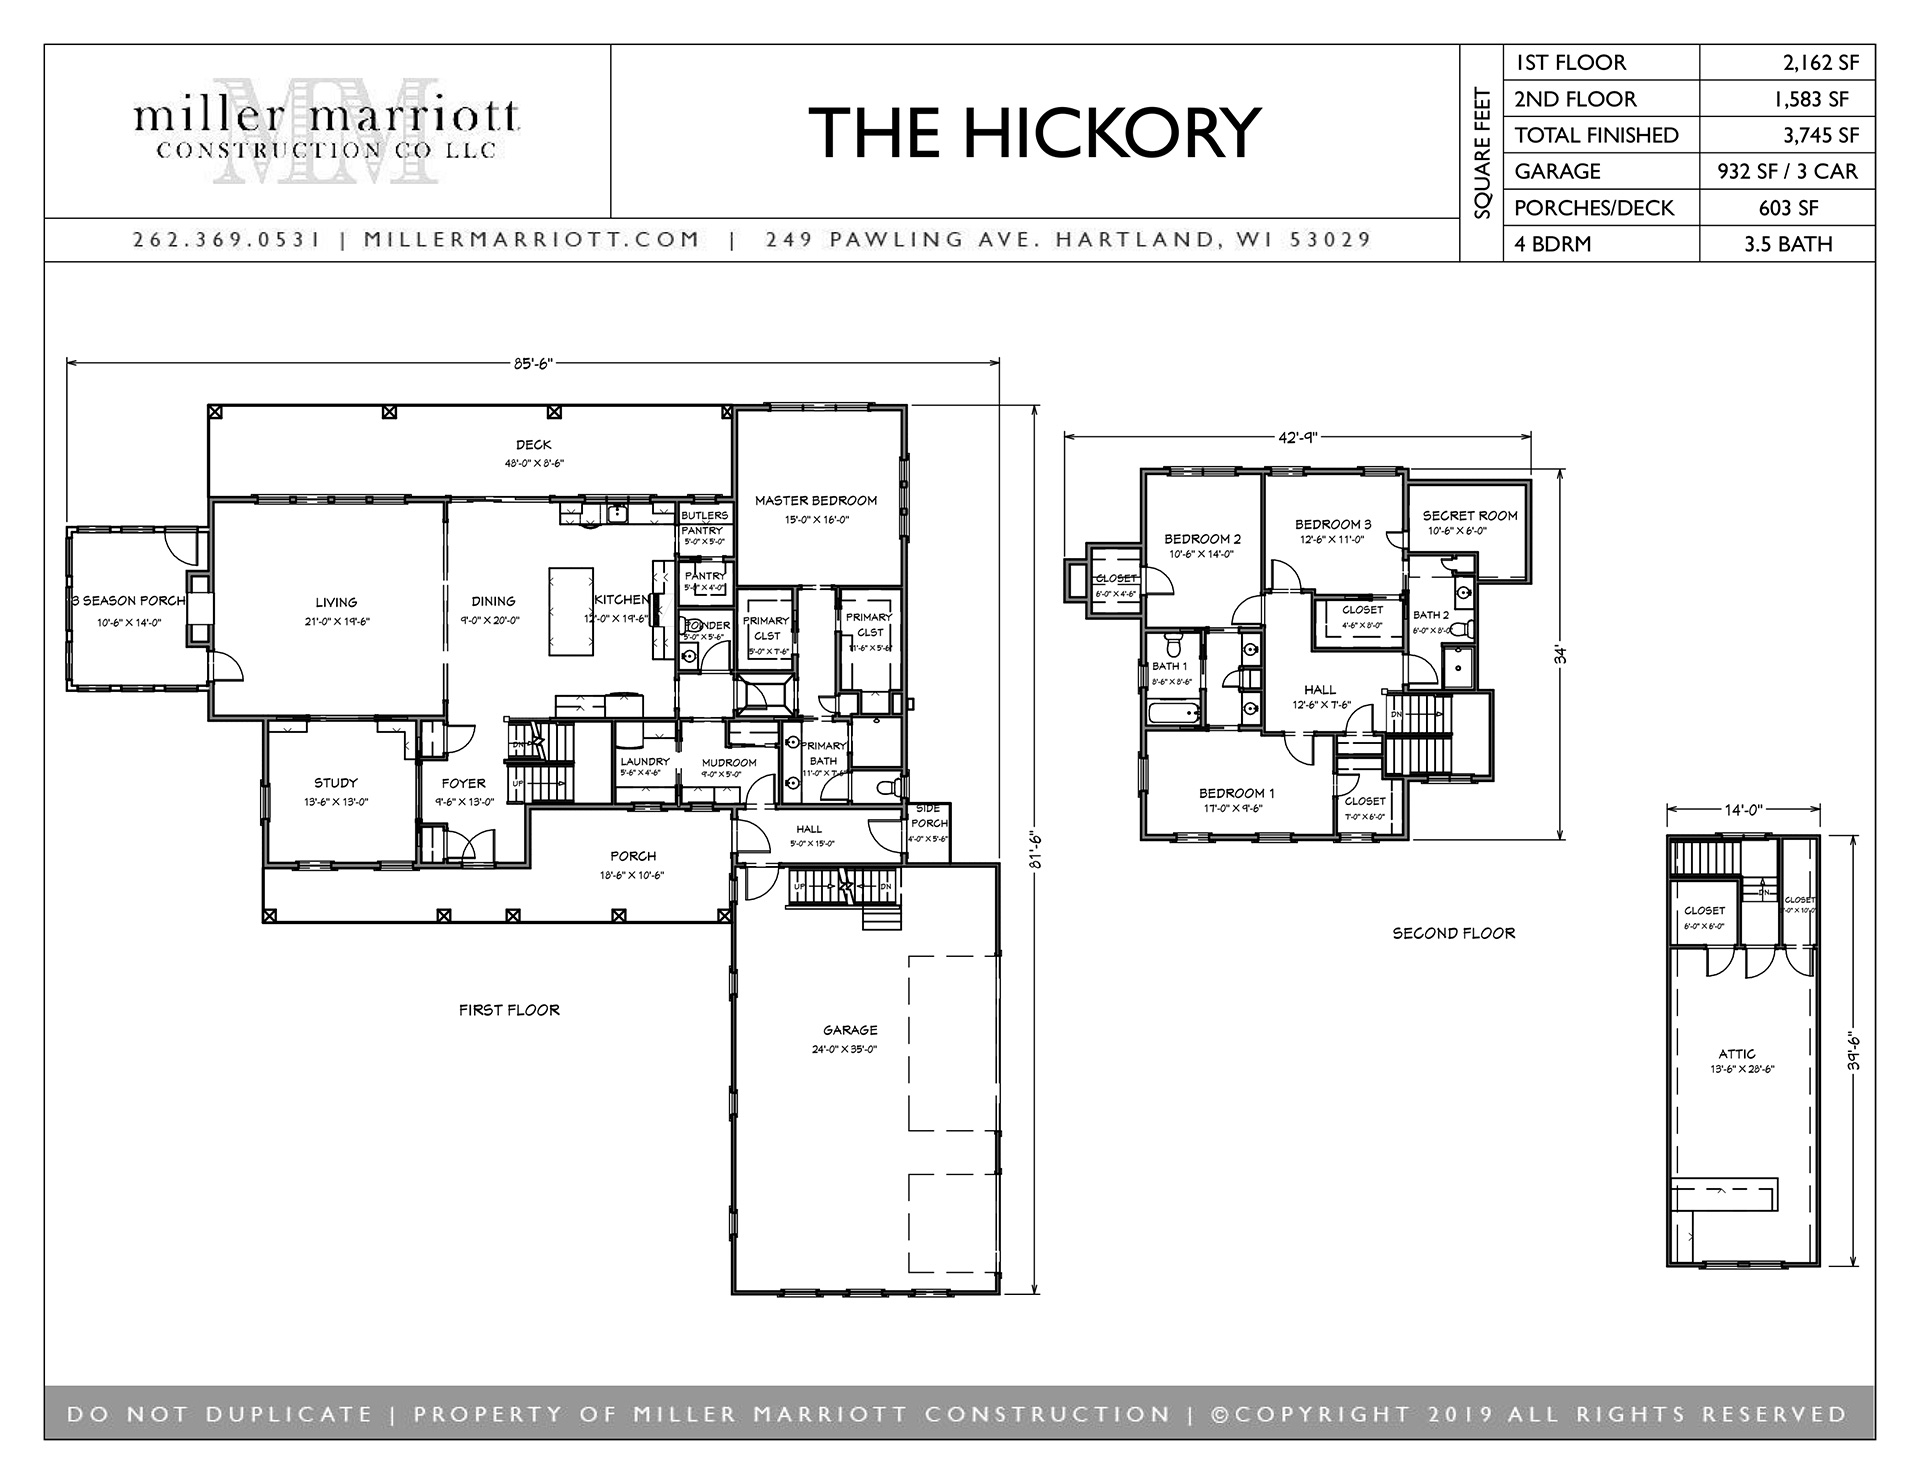 The Hickory first and second floor plan